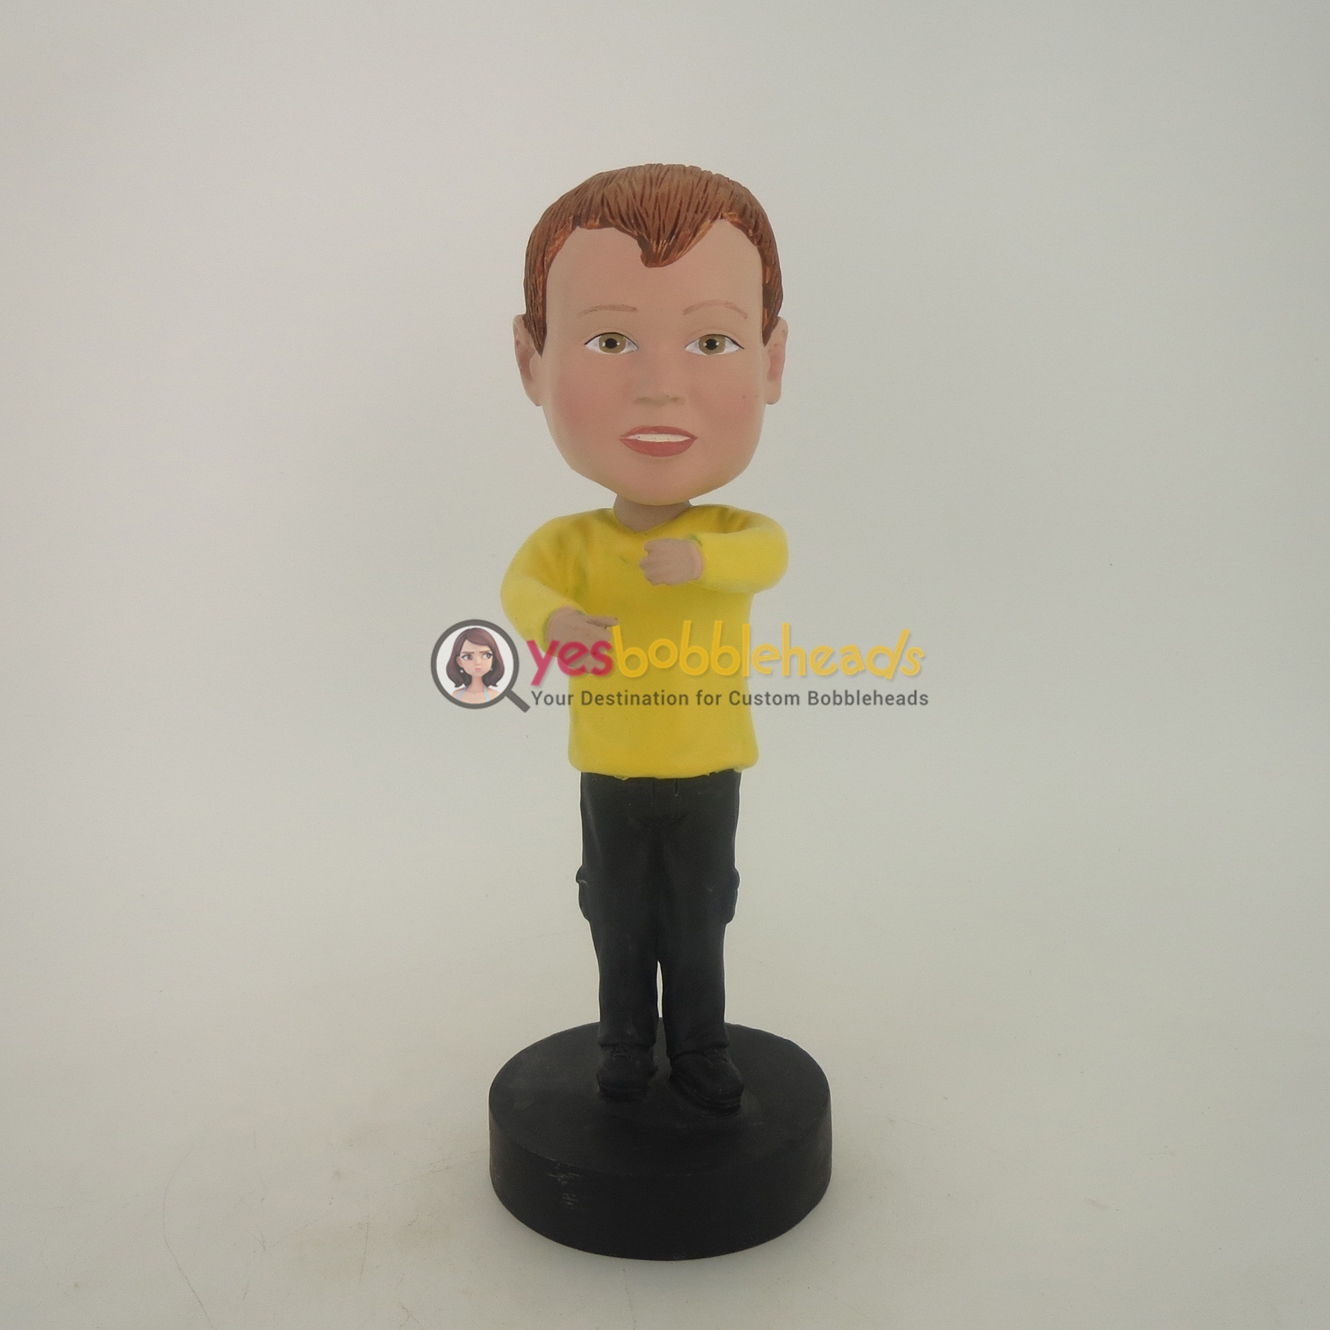 Picture of Custom Bobblehead Doll: Boy In Yellow With Holding Gesture